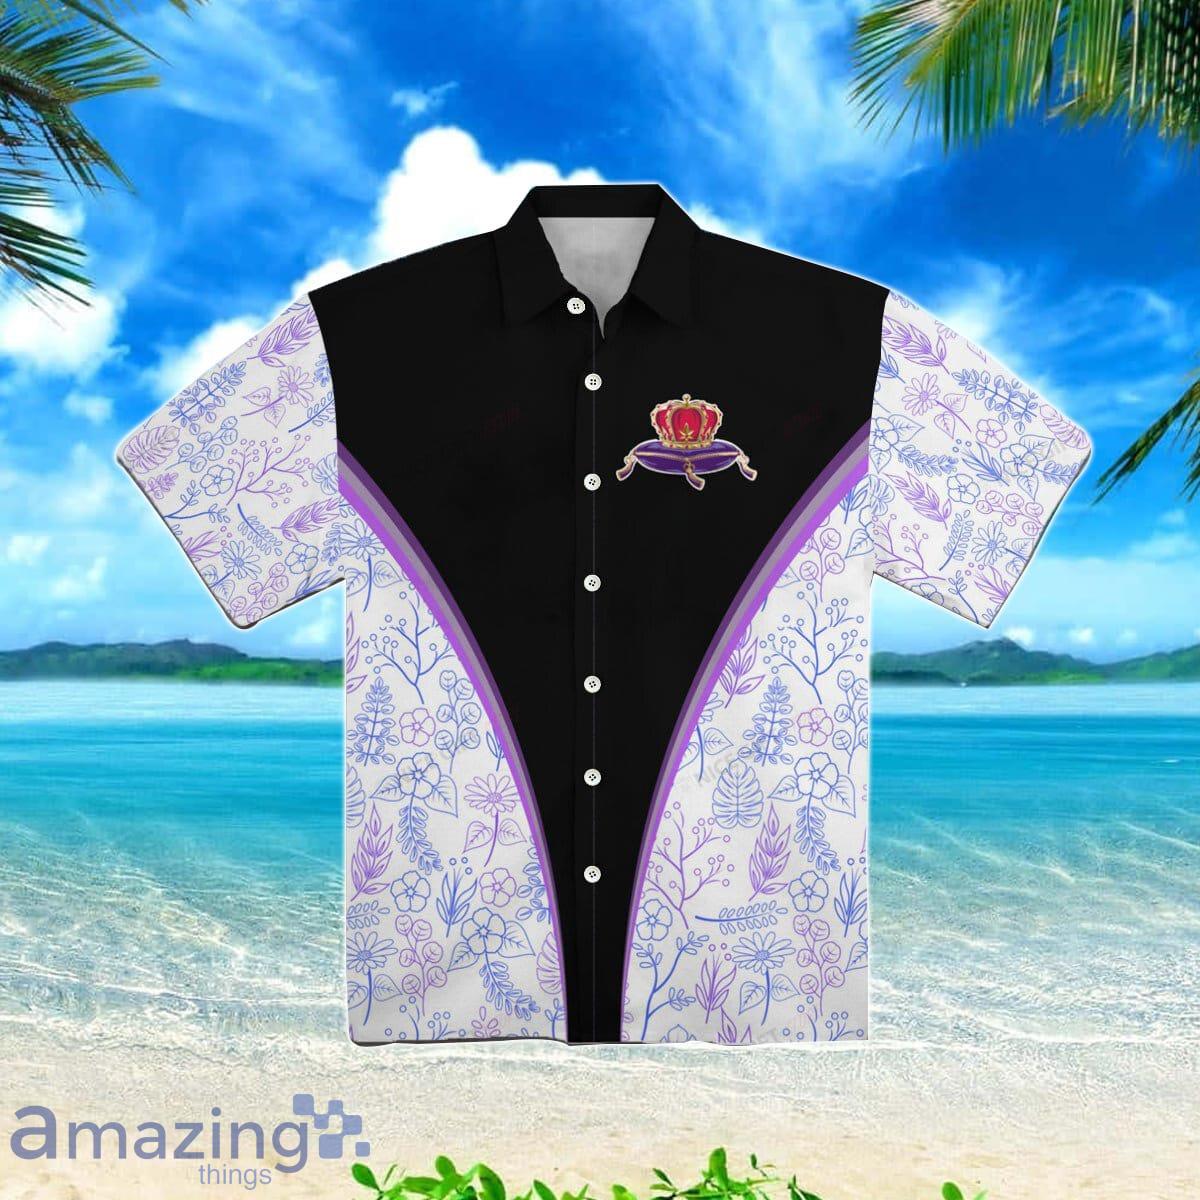 Crown Royal Hawaiian Shirt Best Gift For Family Product Photo 1